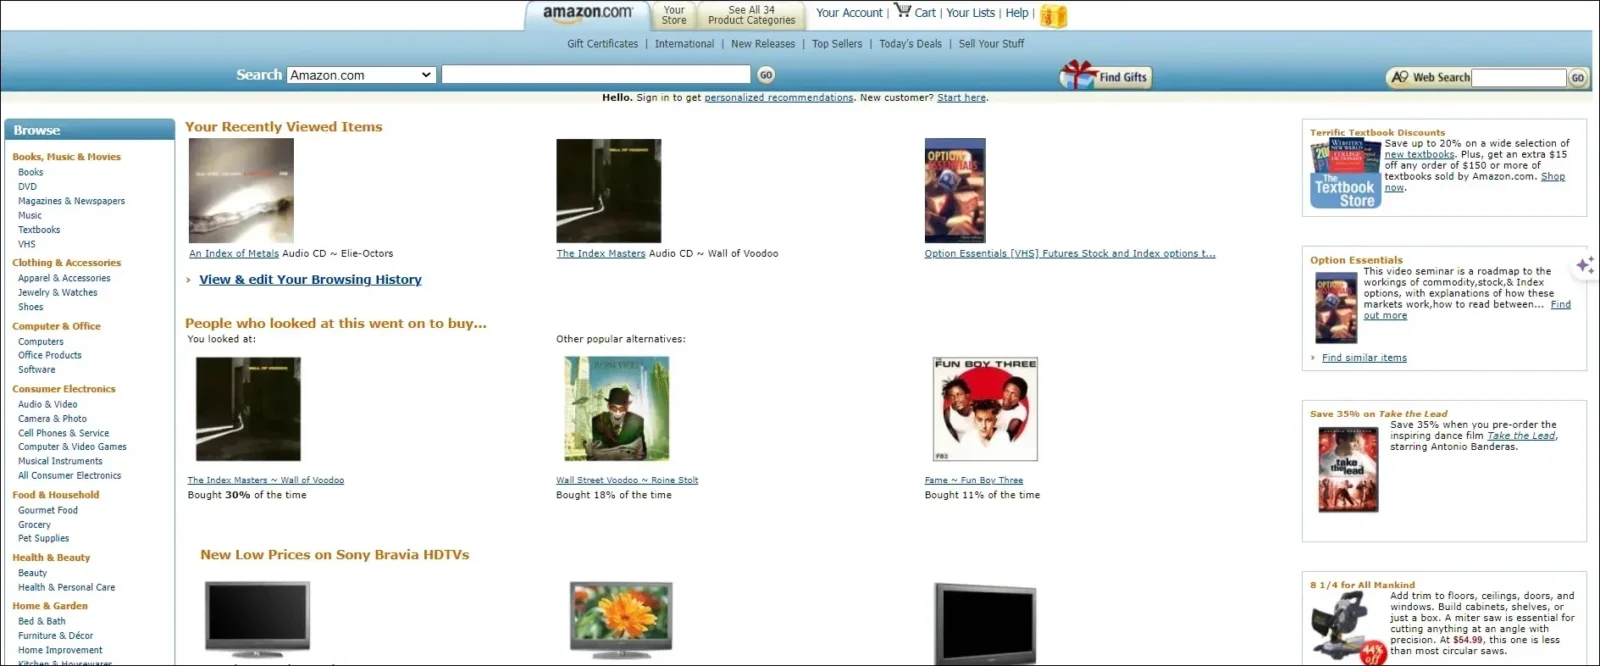 homepage of amazon in 2006